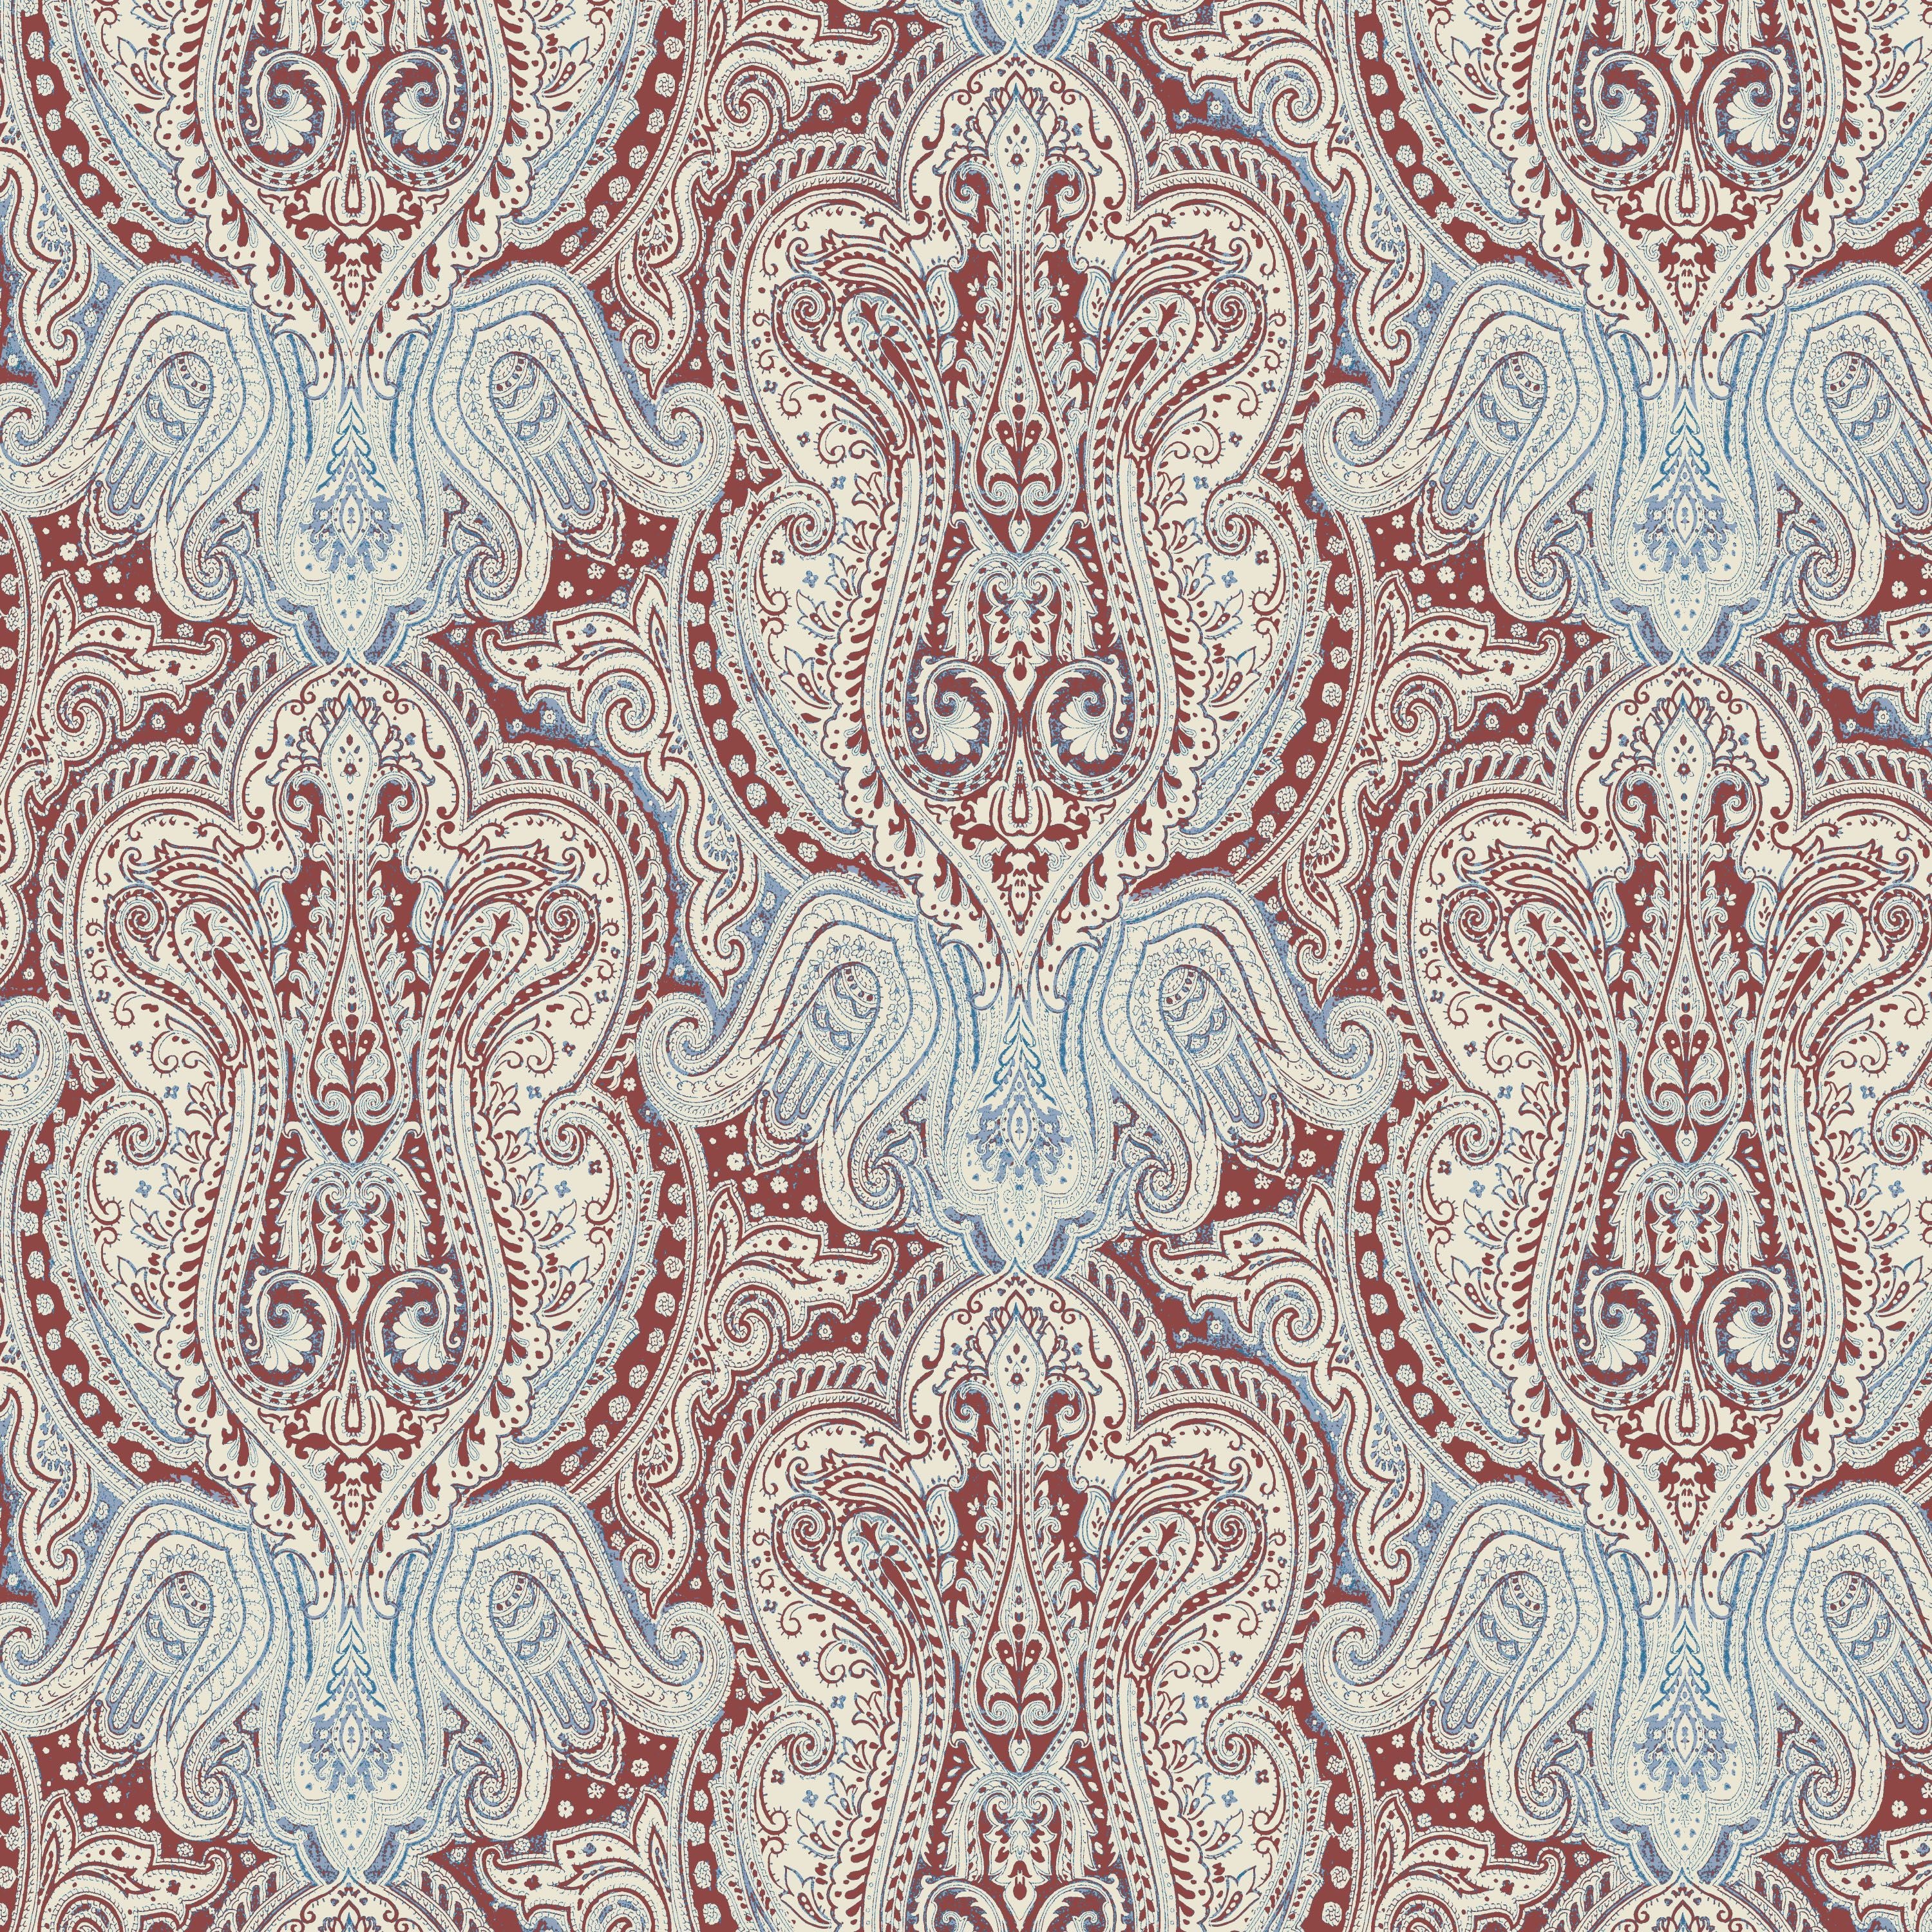 Waverly Inspirations 100% Cotton Duck 45" Width Paisley Med Red Color Sewing Fabric by the Yard